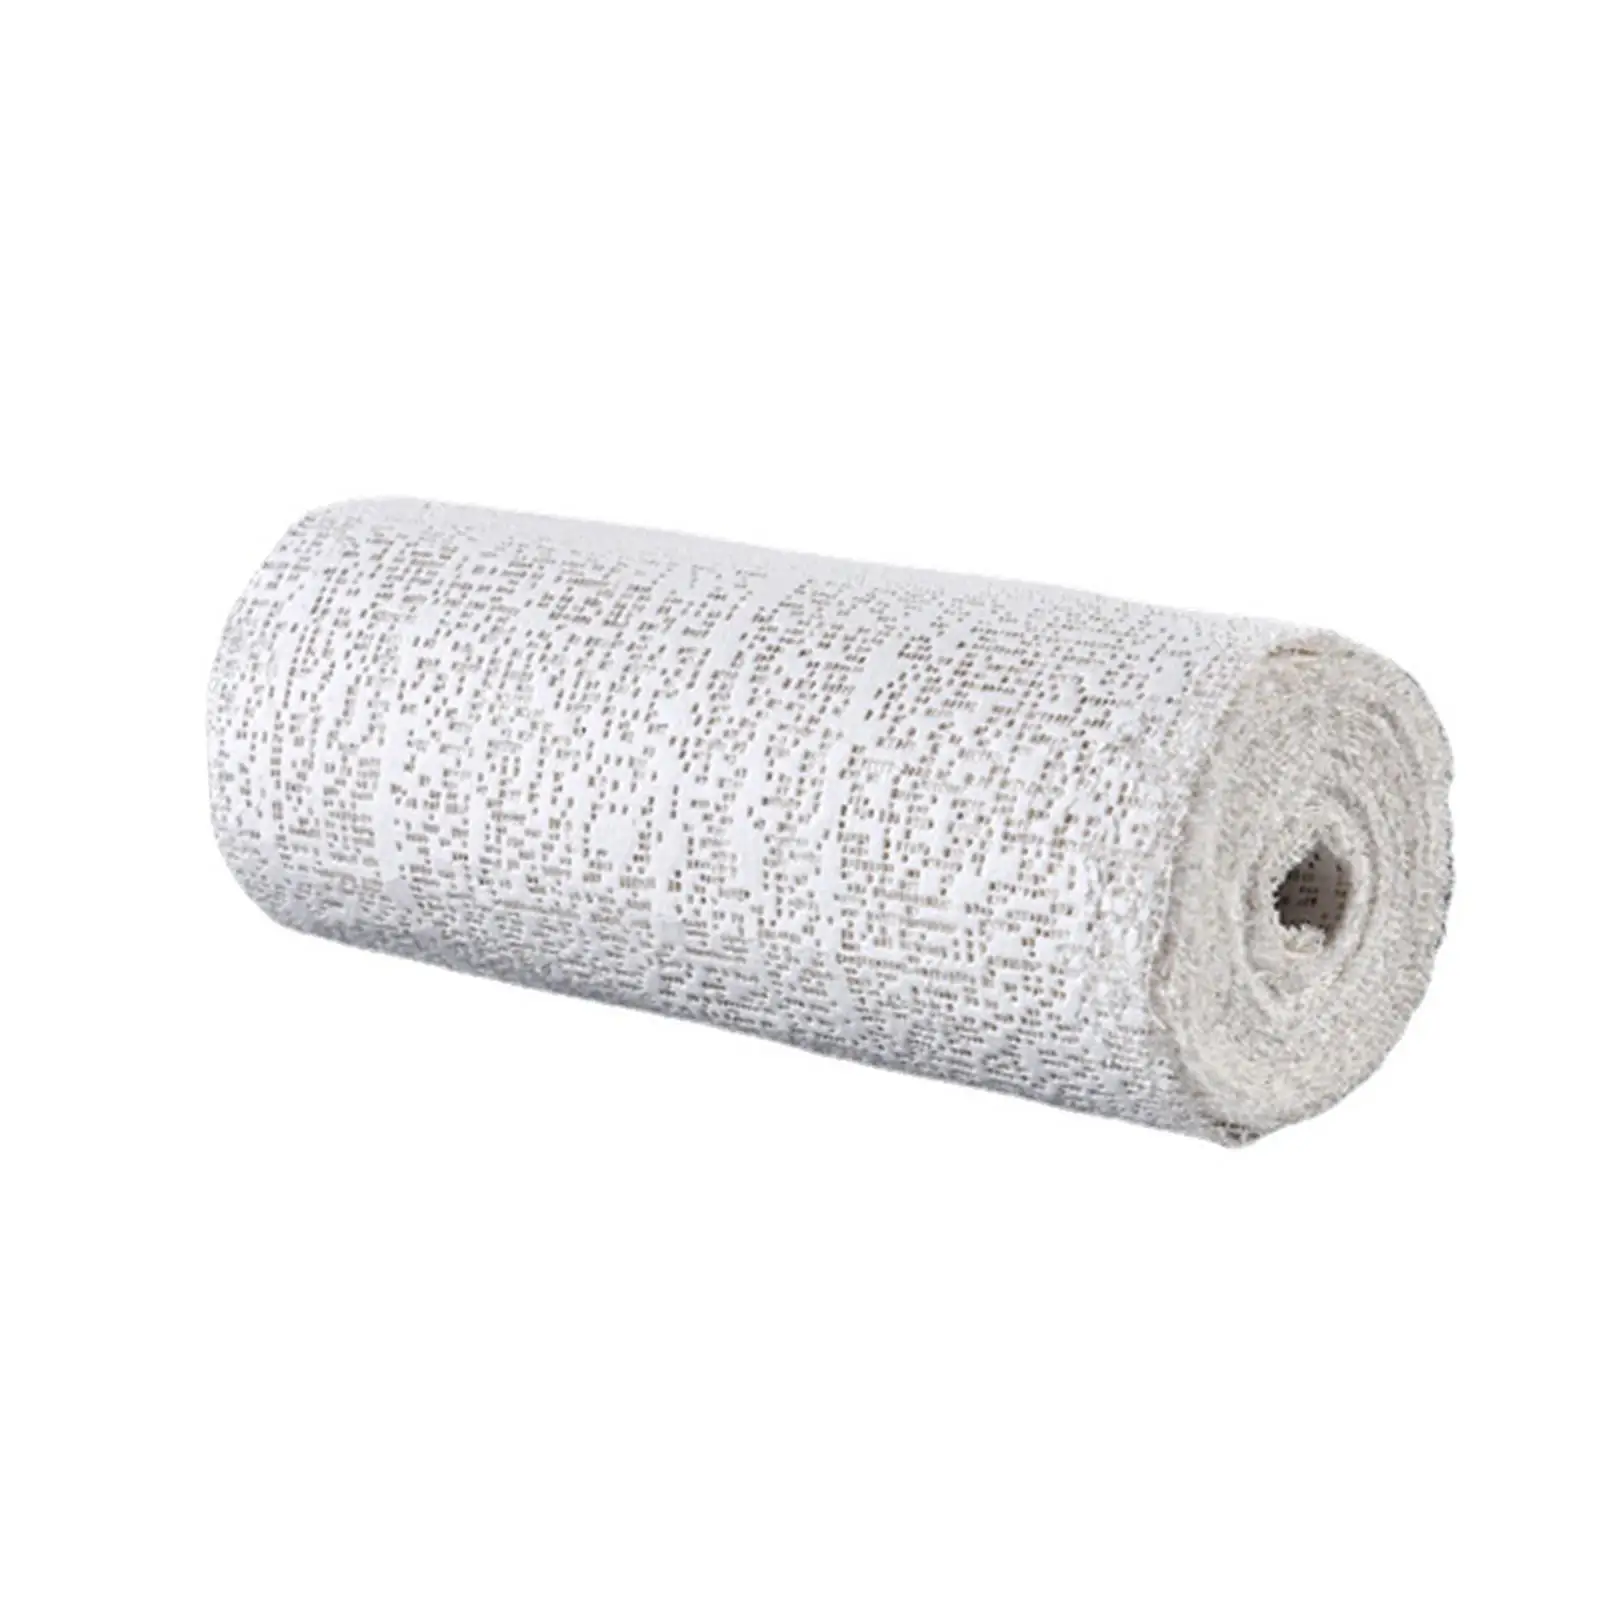 Plaster Cloth Gauze Bandages Cast Material Wrap Tape for Belly Casting Sculpturing Model Trains Railway Layout Crafting